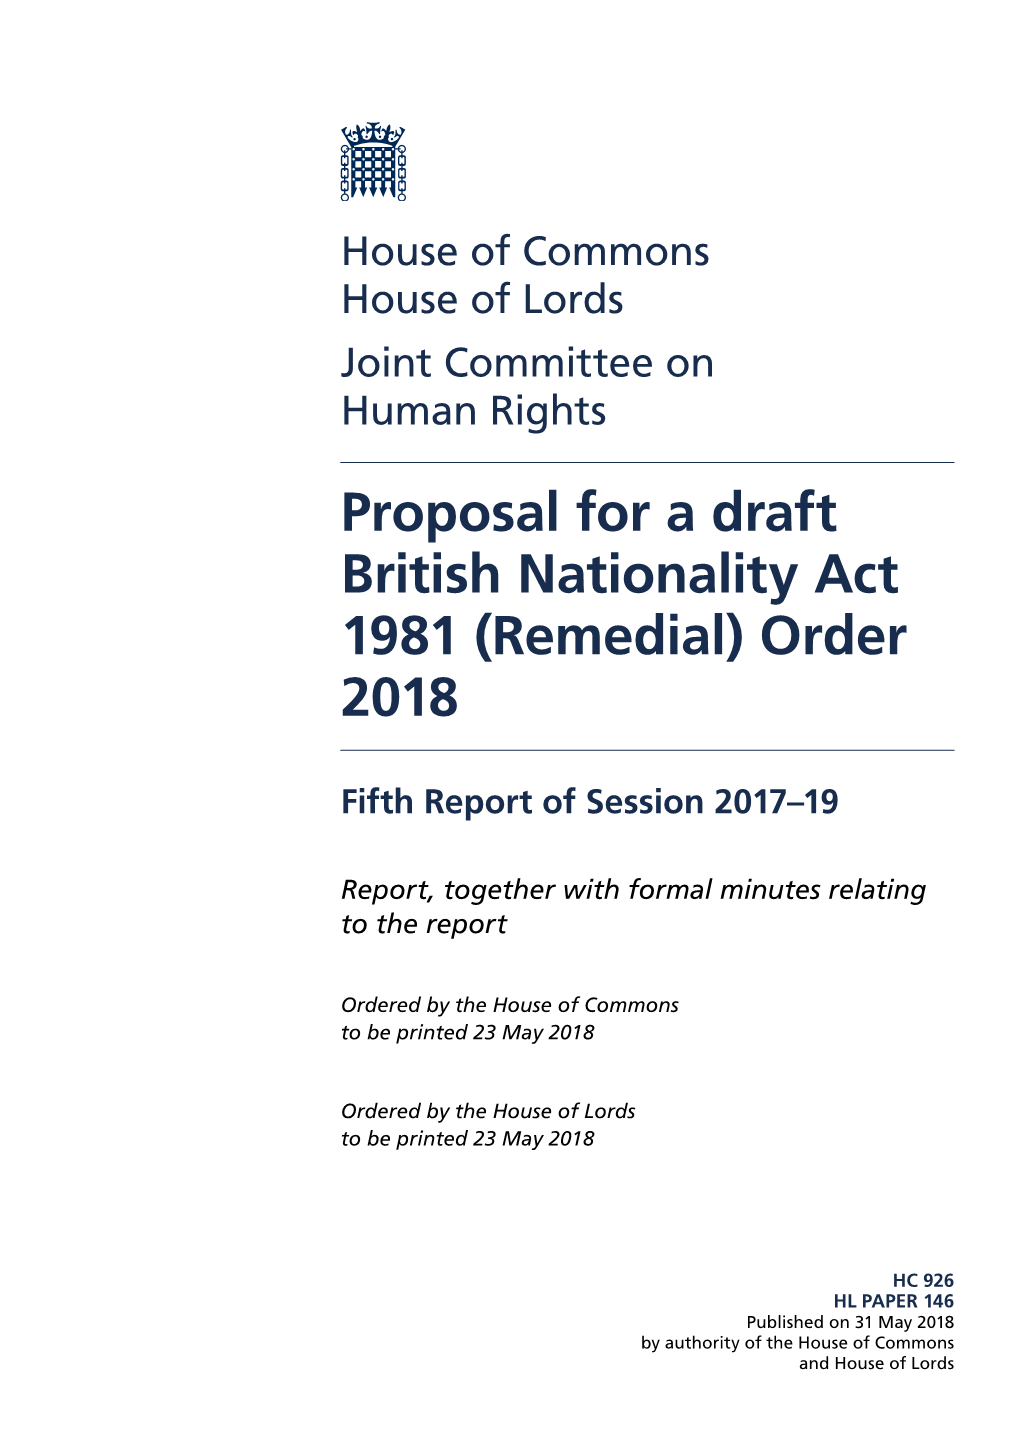 Proposal for a Draft British Nationality Act 1981 (Remedial) Order 2018